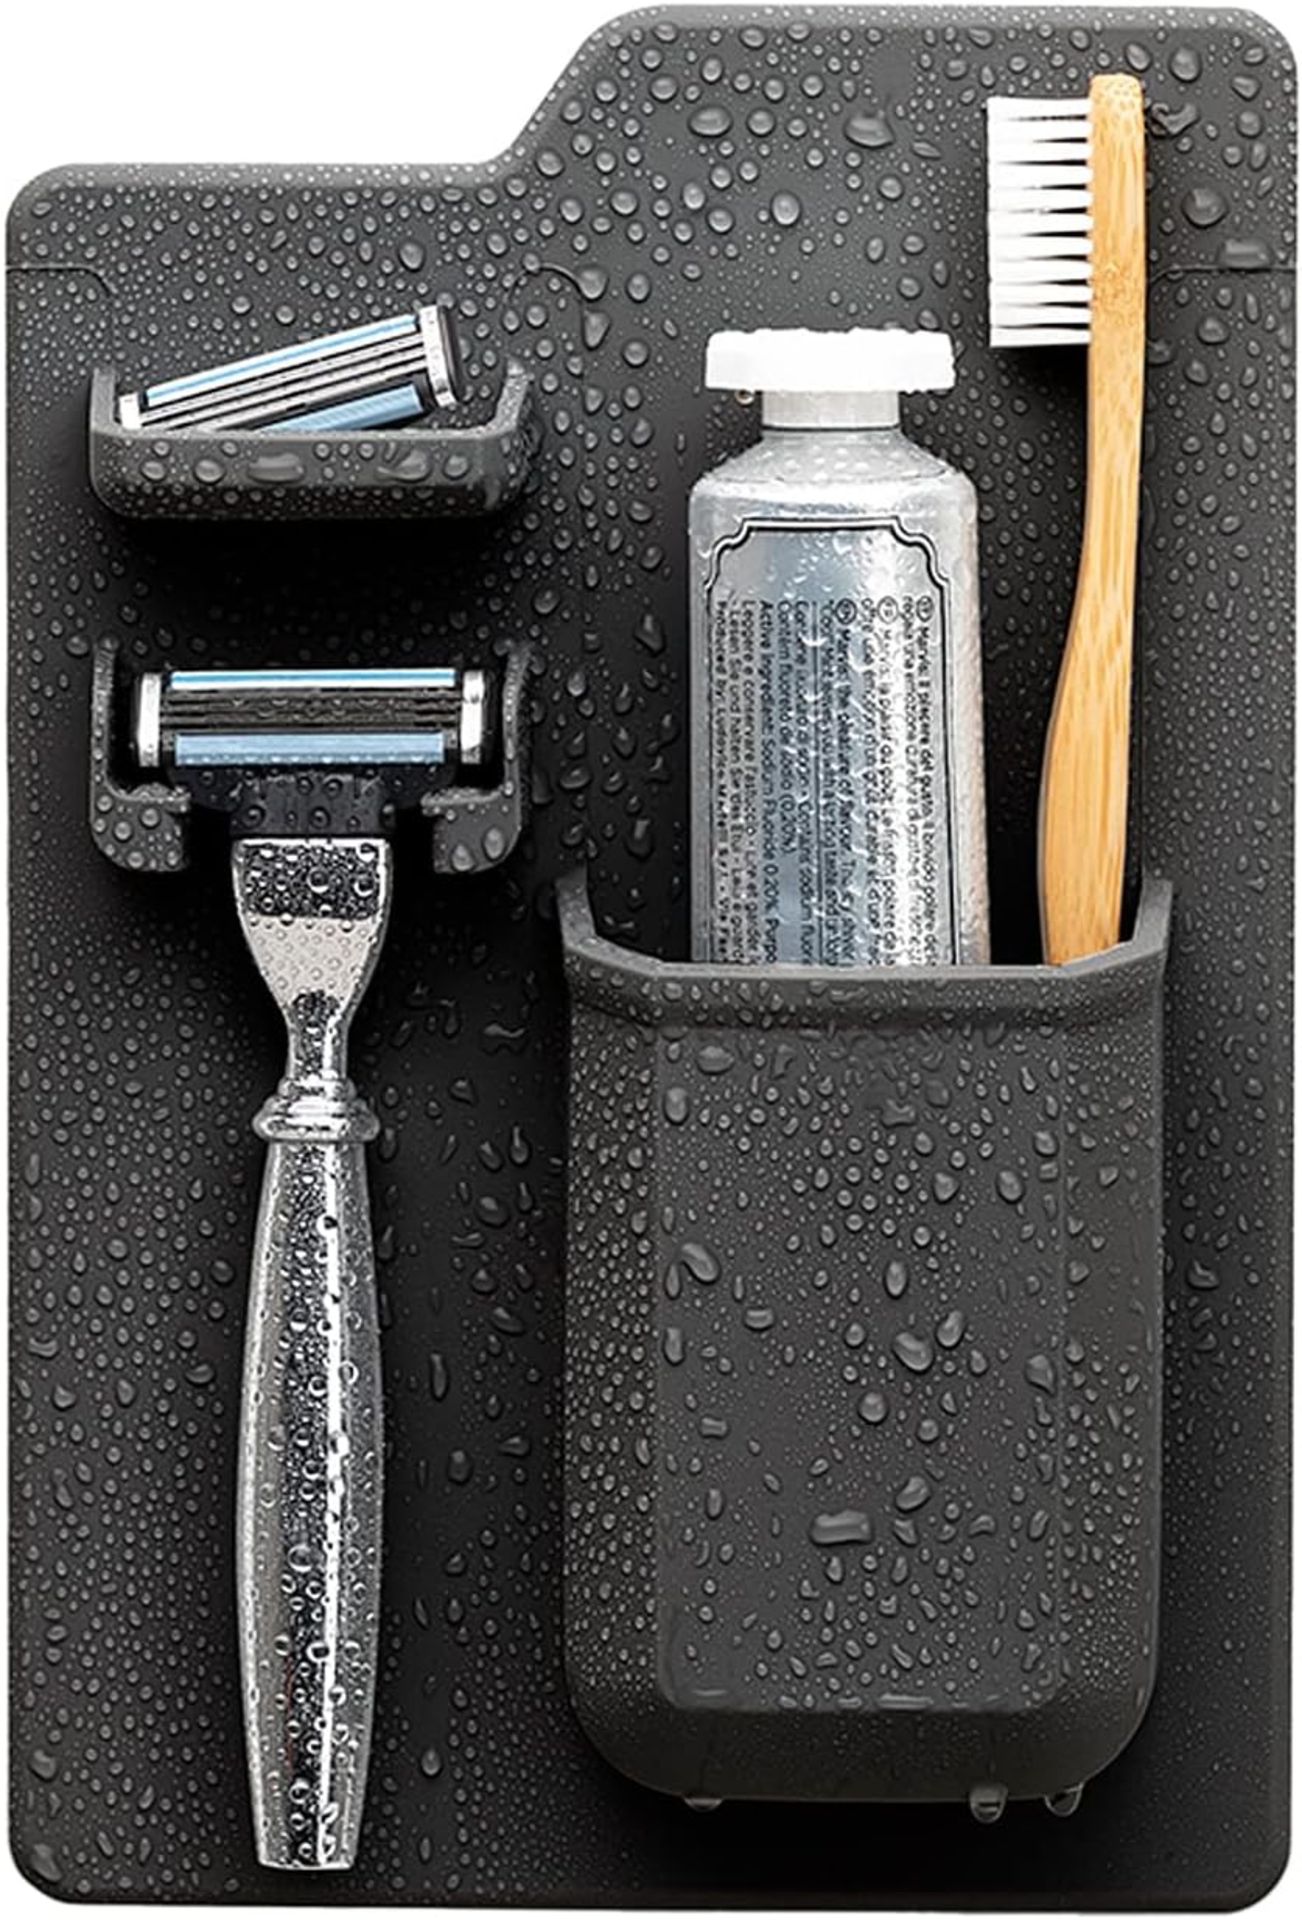 Tooletries The Harvey Toothbrush and Razor Holder x24, Charcoal. Est Retail Value £360 - Image 3 of 5